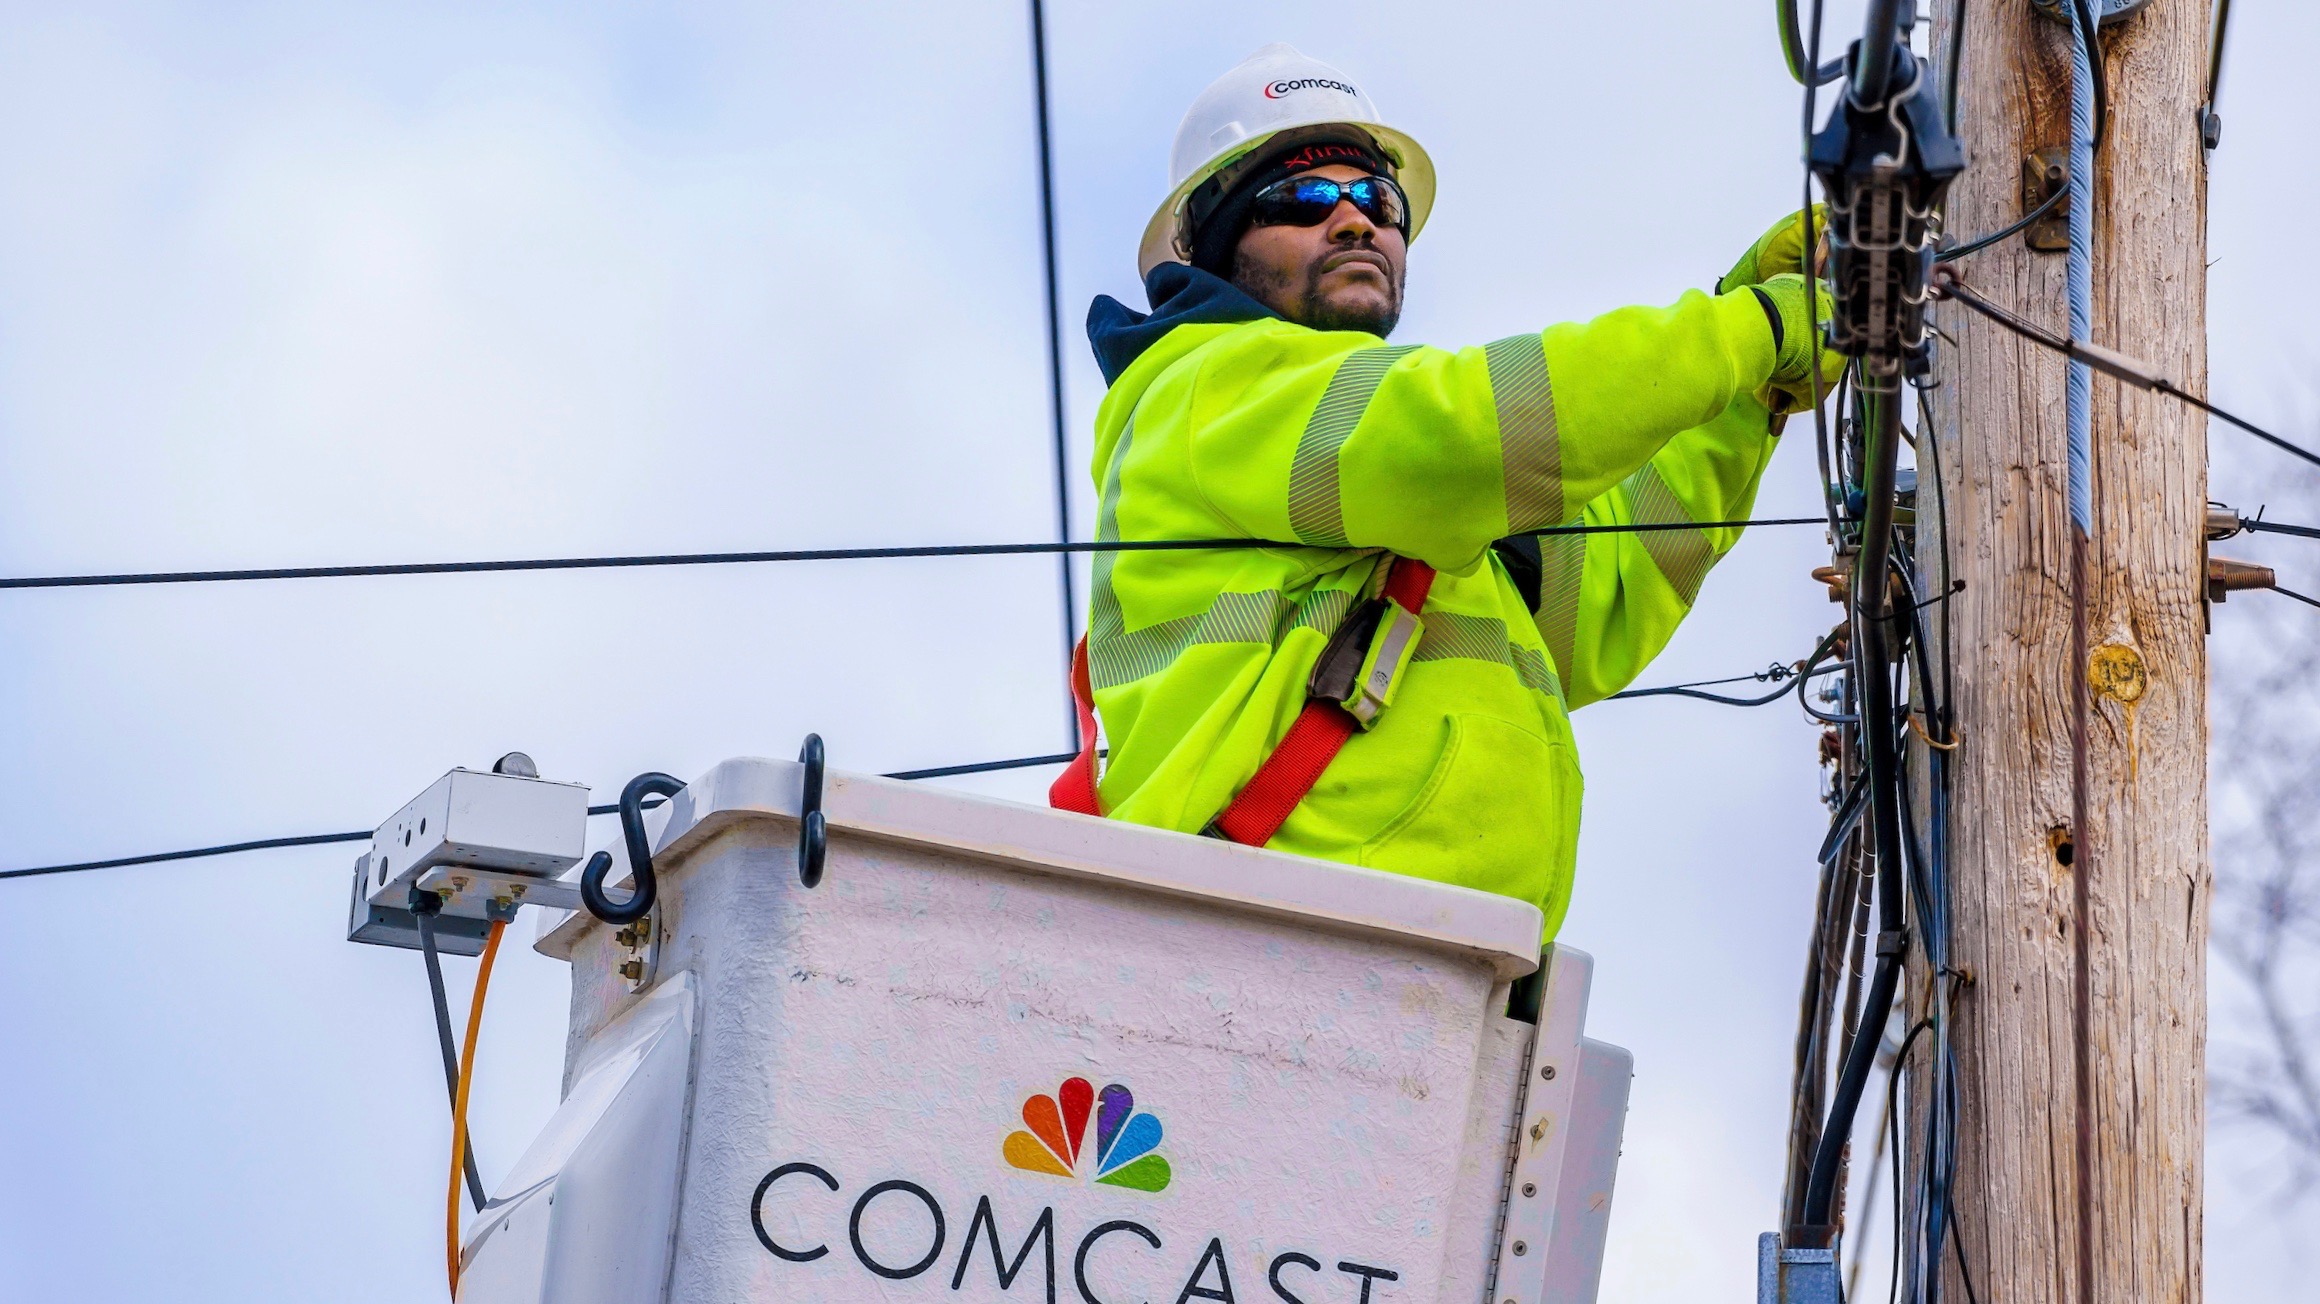 Comcast technicians seen at a construction site installation on Wednesday, Jan. 24, 2018 in Levittown, Pa. (Jeff Fusco/AP Images for Comcast)